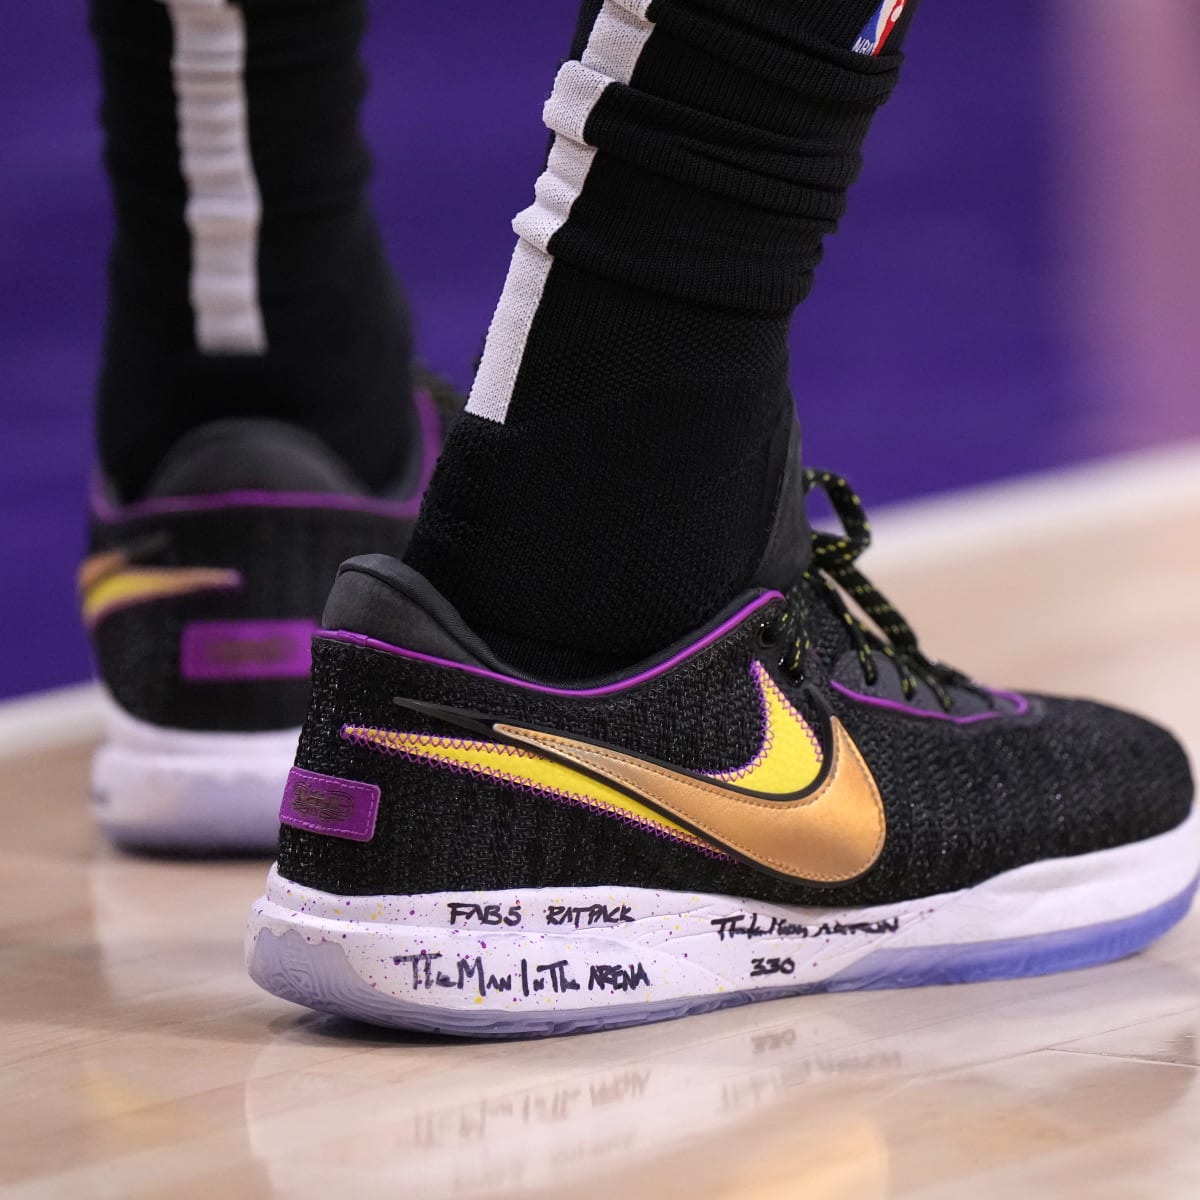 The Nike LeBron shoes worn by Los Angeles Lakers forward LeBron